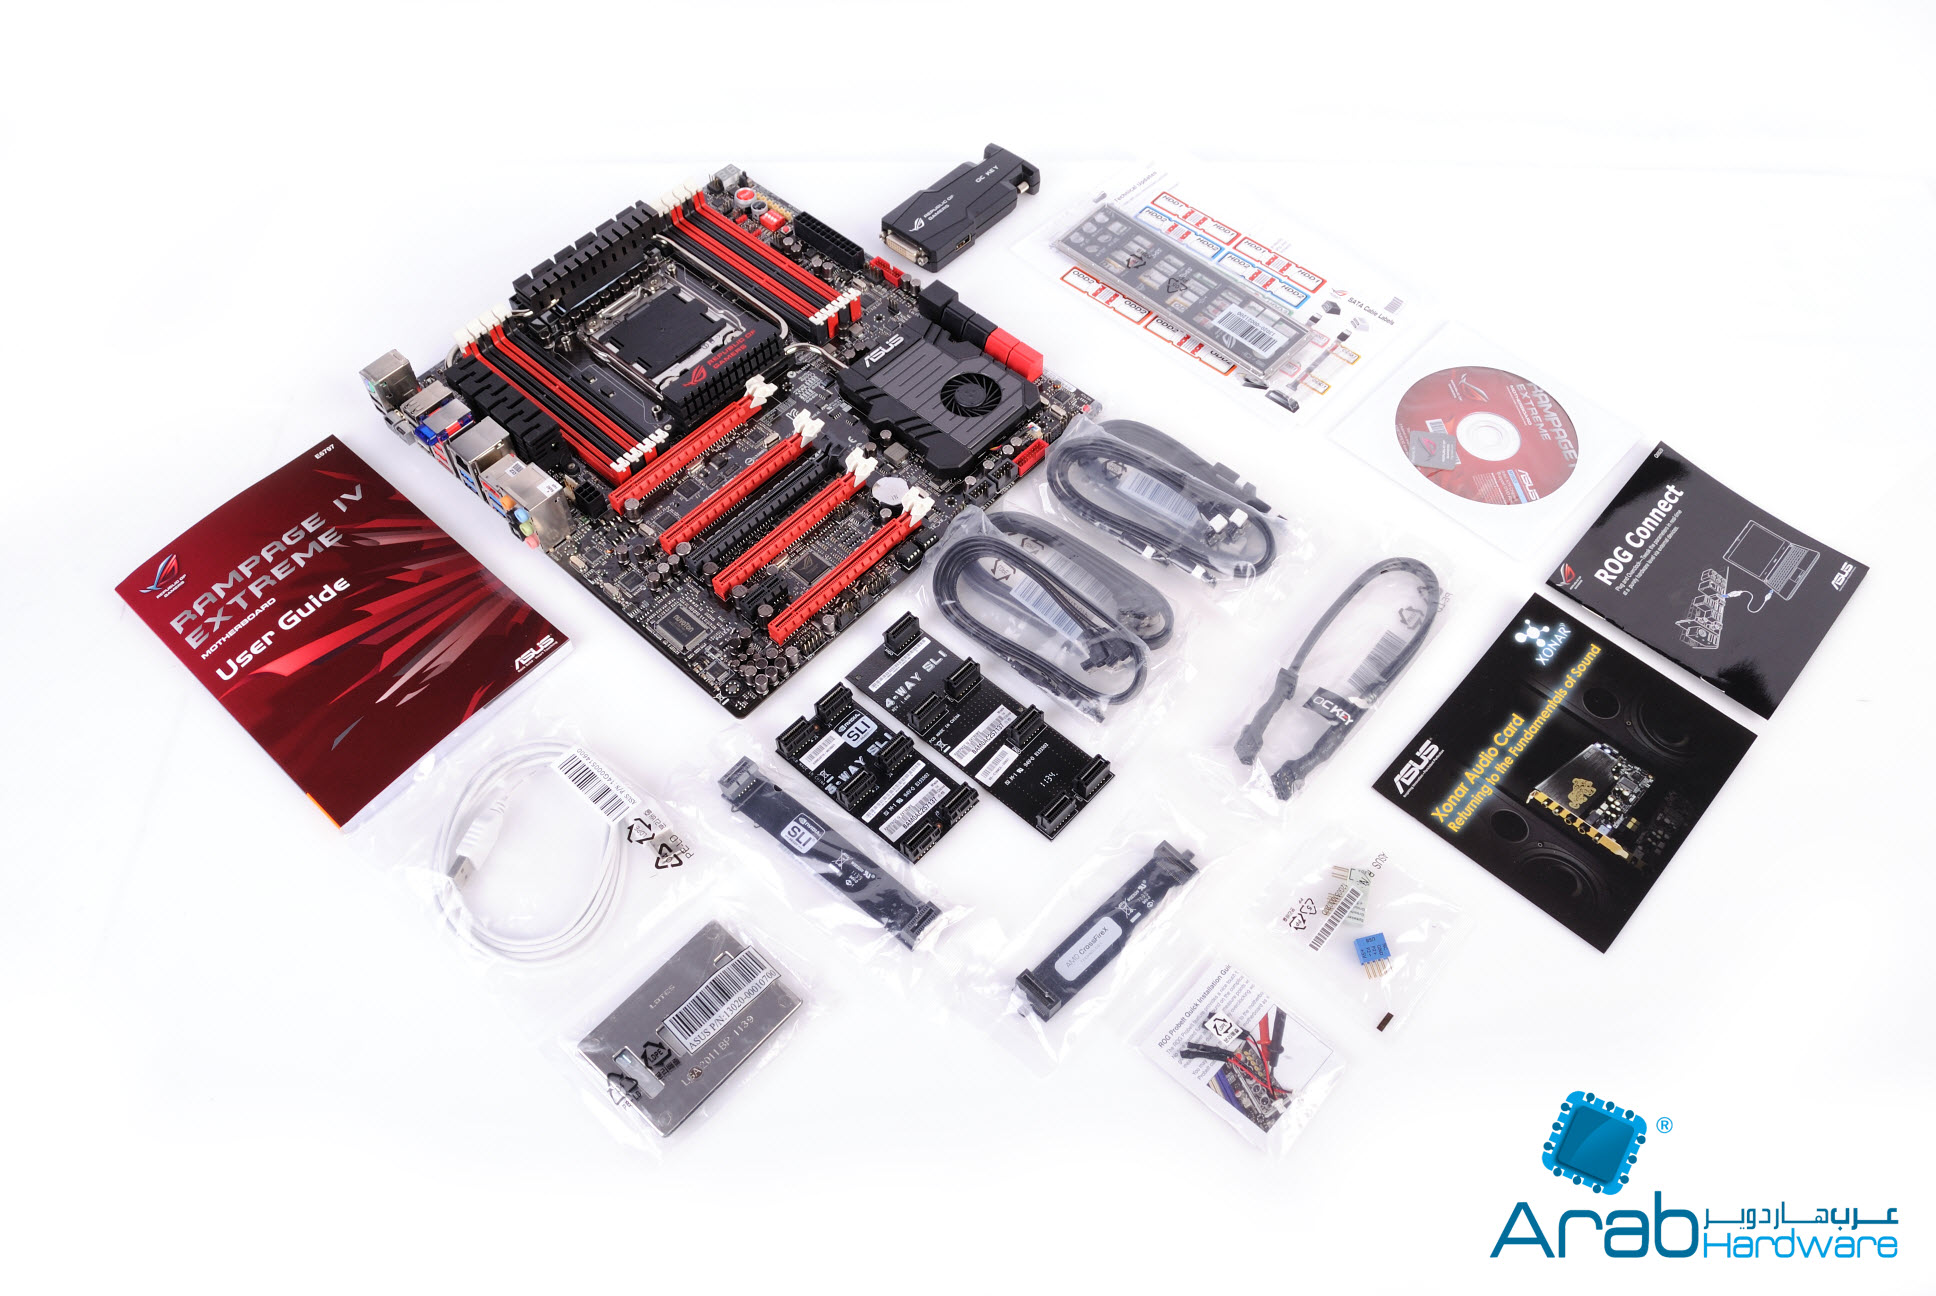 Asus Rampage IV Extreme Motherboard Review - Arabhardware